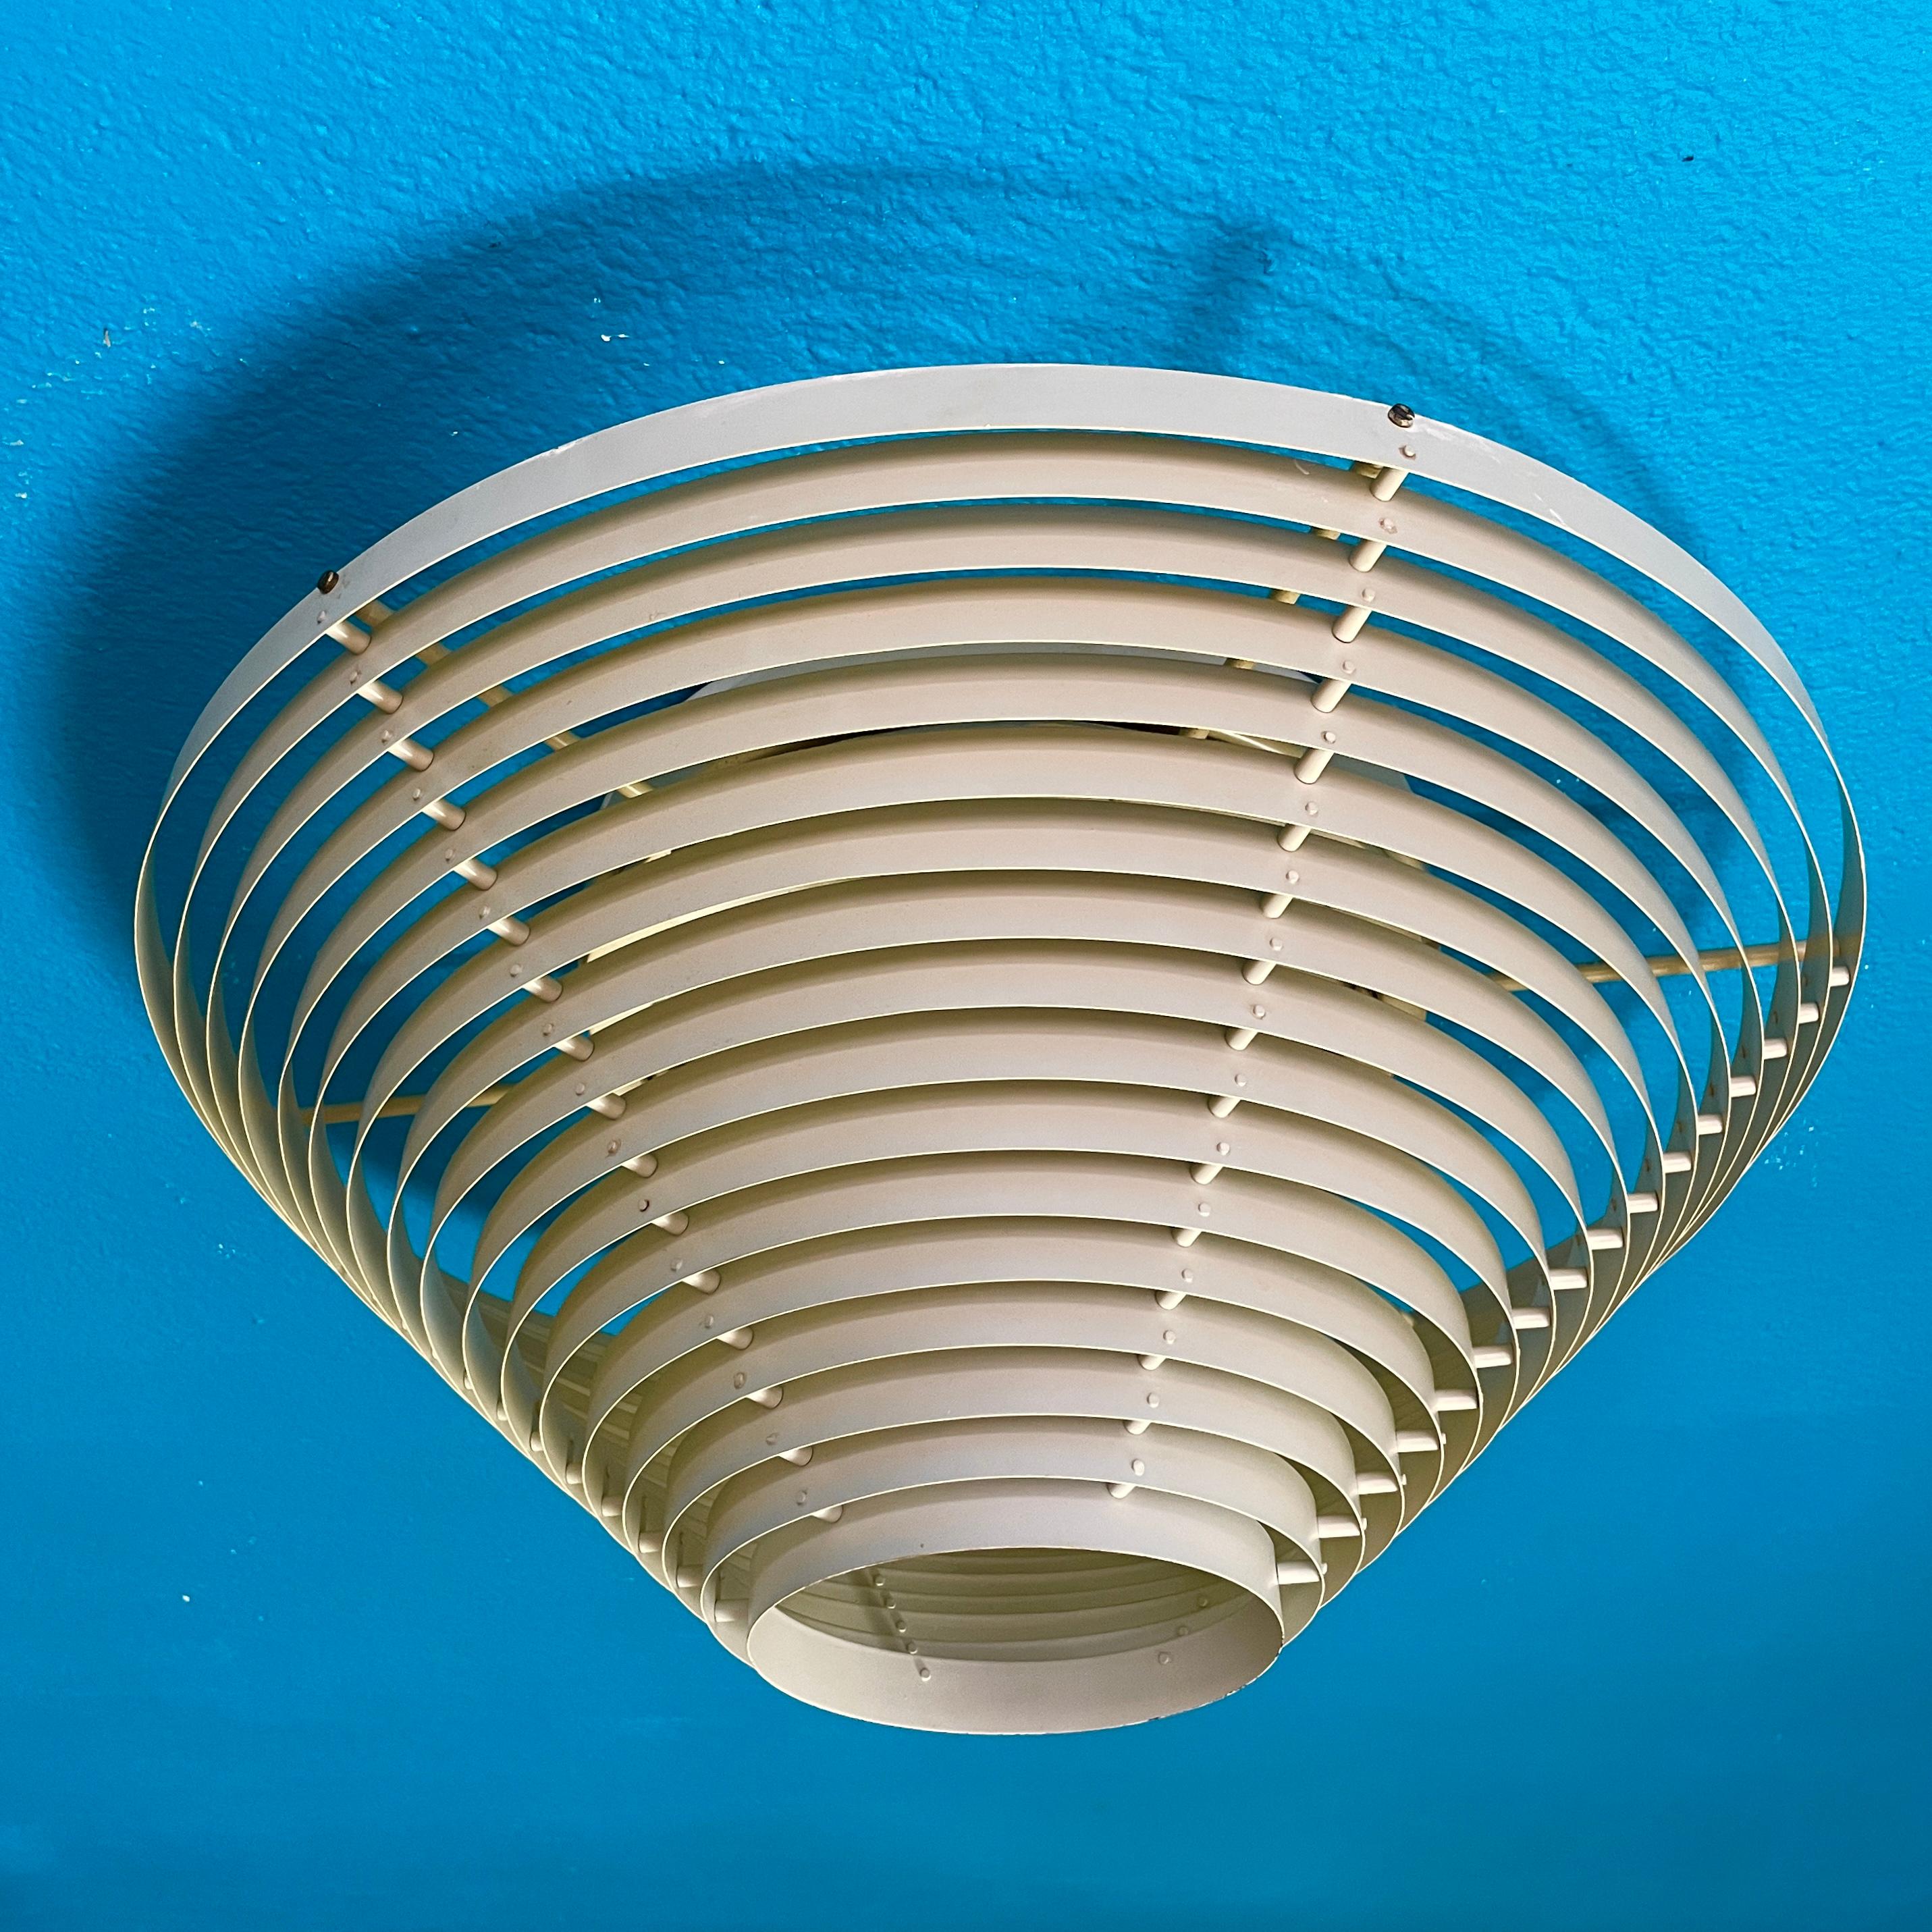 Alvar Aalto designed the A622B lamp in 1953 for the National Pensions Institute of Helsinki, and its timeless elegance will easily complement modern homes and public spaces, too.

This lamp is nice and rare early-produced piece from 1950's. Made